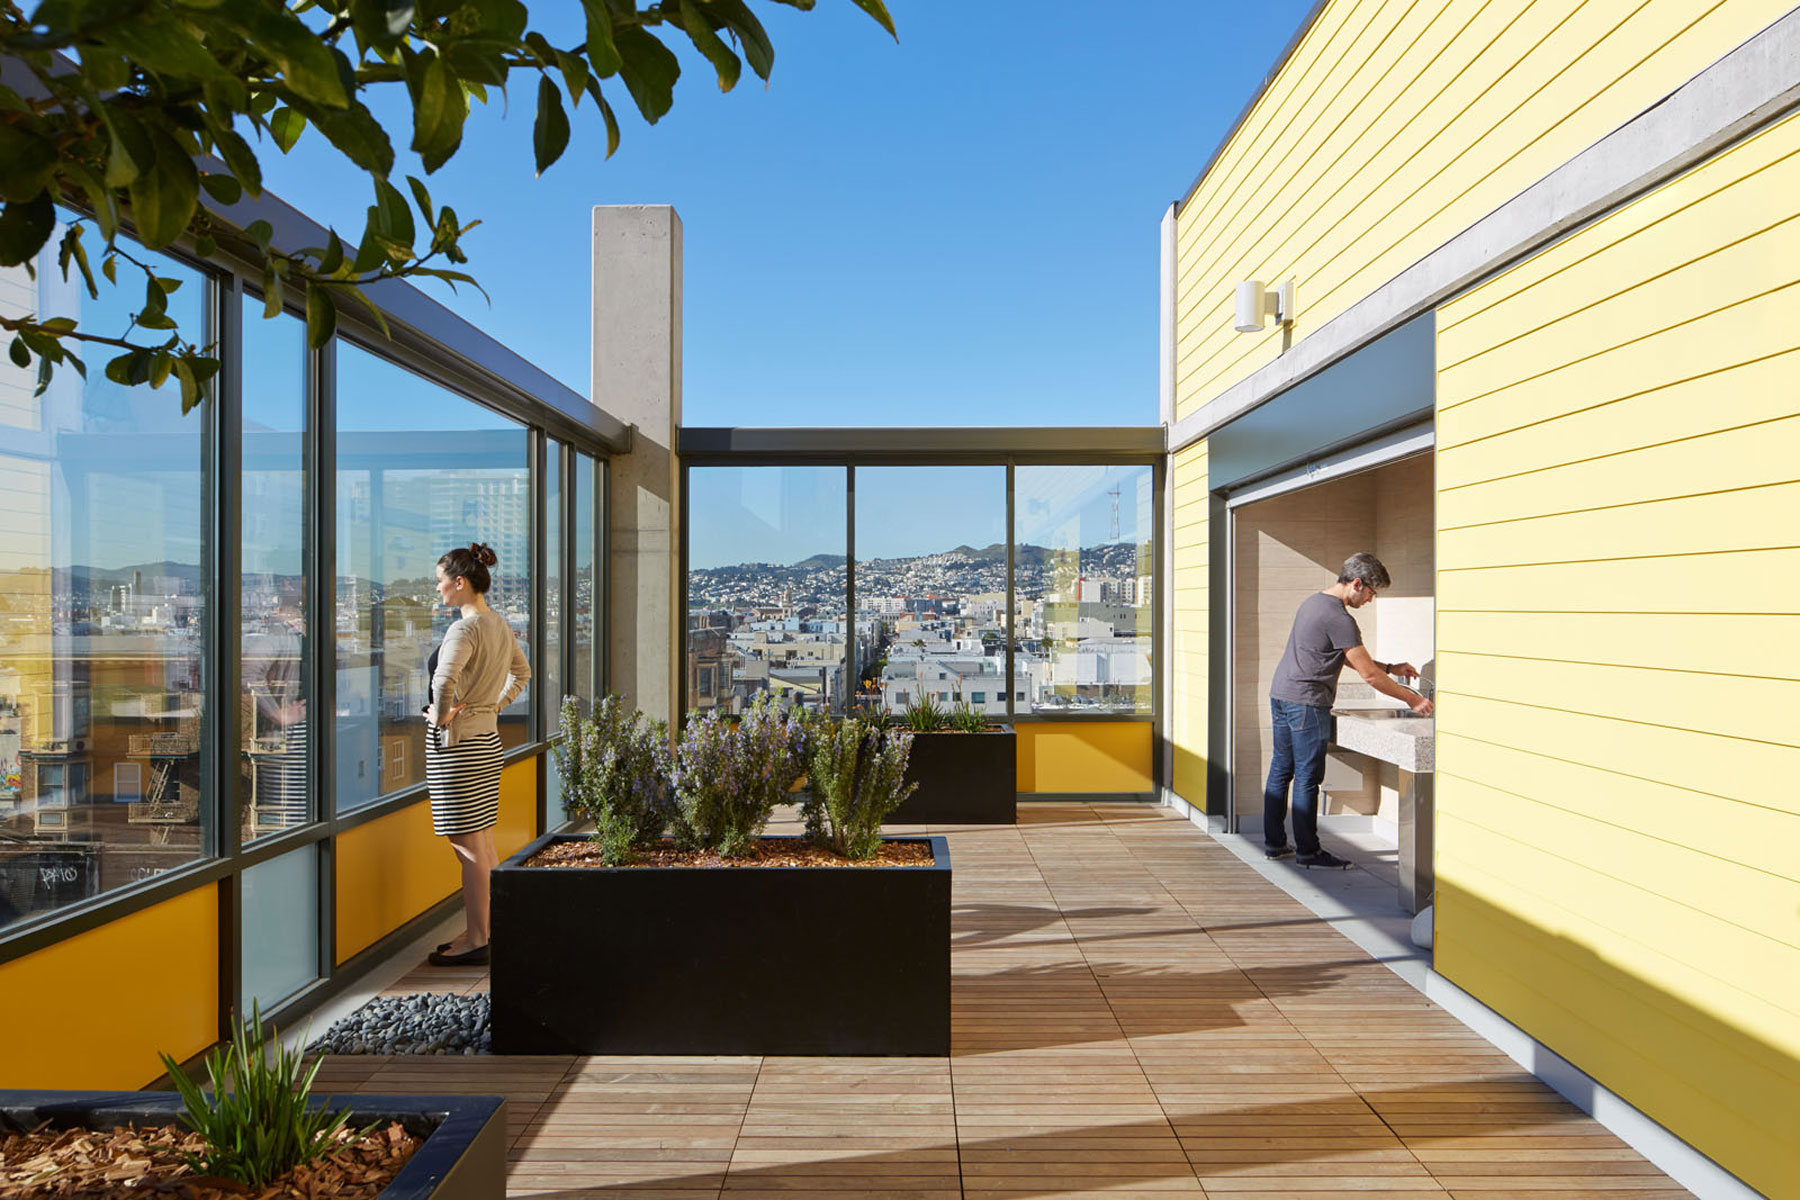 474 Natoma Apartments is an affordable family housing development in San Francisco’s South of Market Redevelopment Area; it integrates many sustainable features resulting in a high Green Point certification.